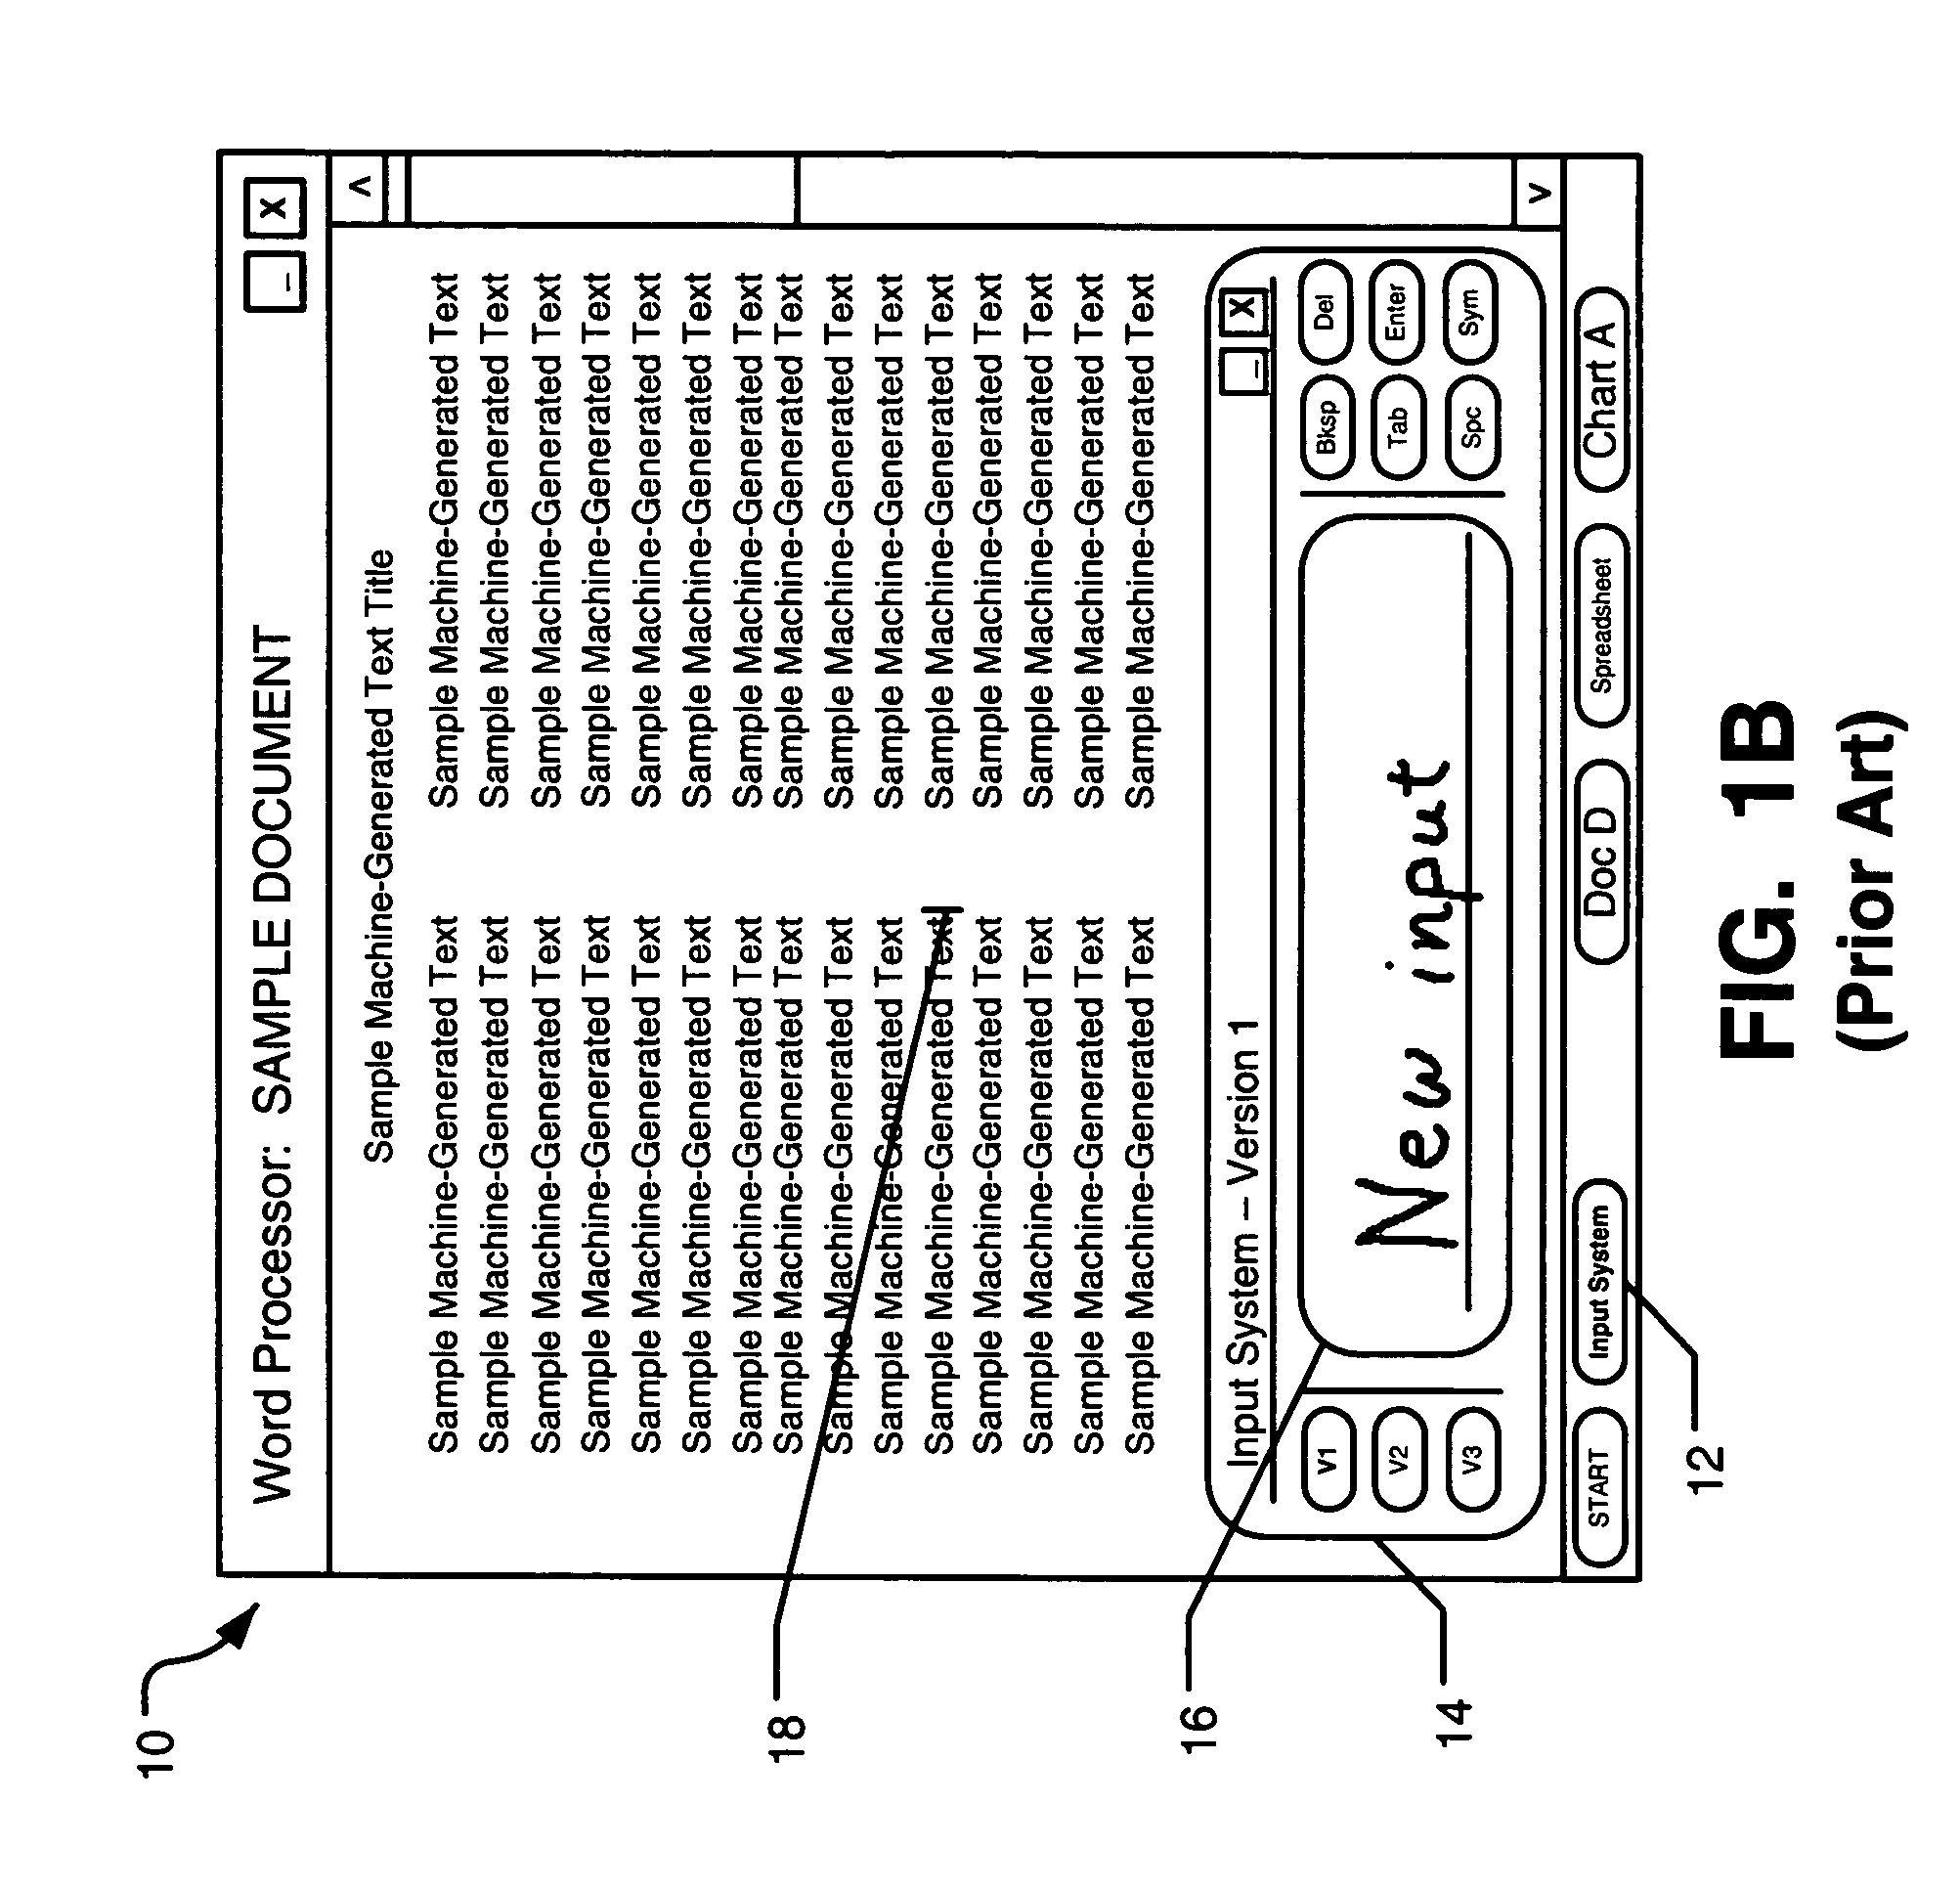 Systems, methods, and computer-readable media for invoking an electronic ink or handwriting interface